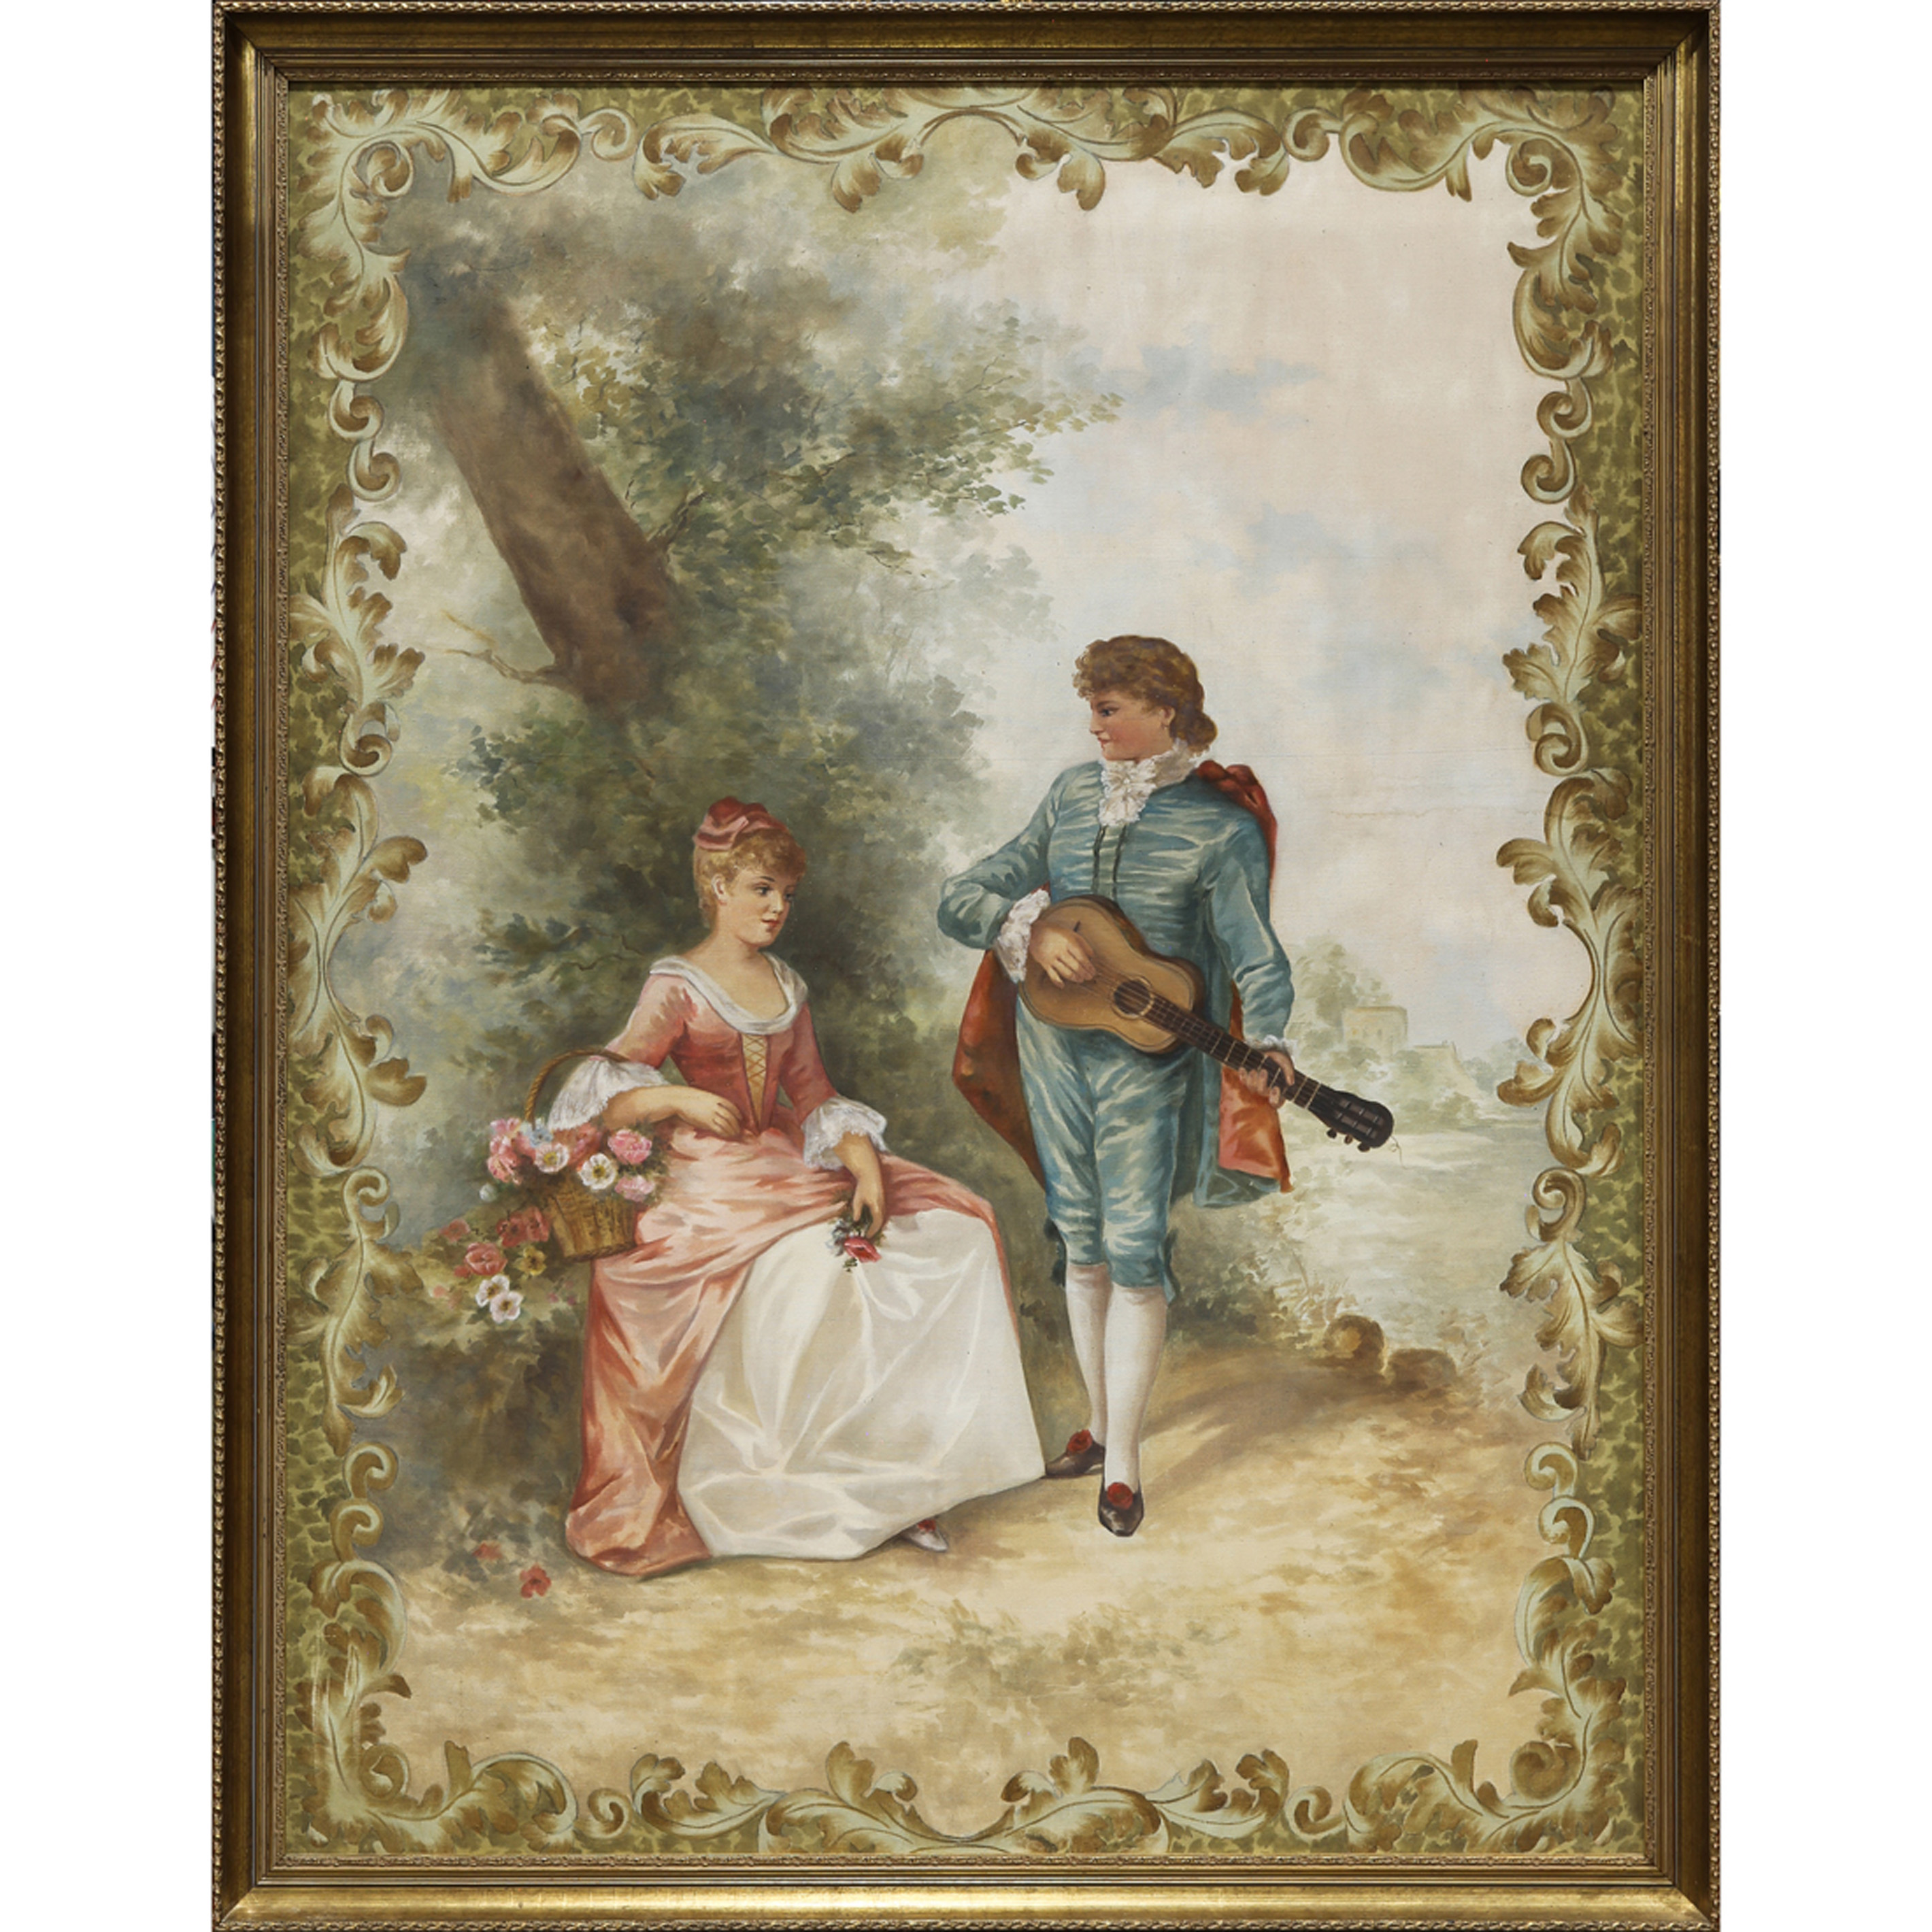 PAINTING COURTING SCENE Continental 3a358b